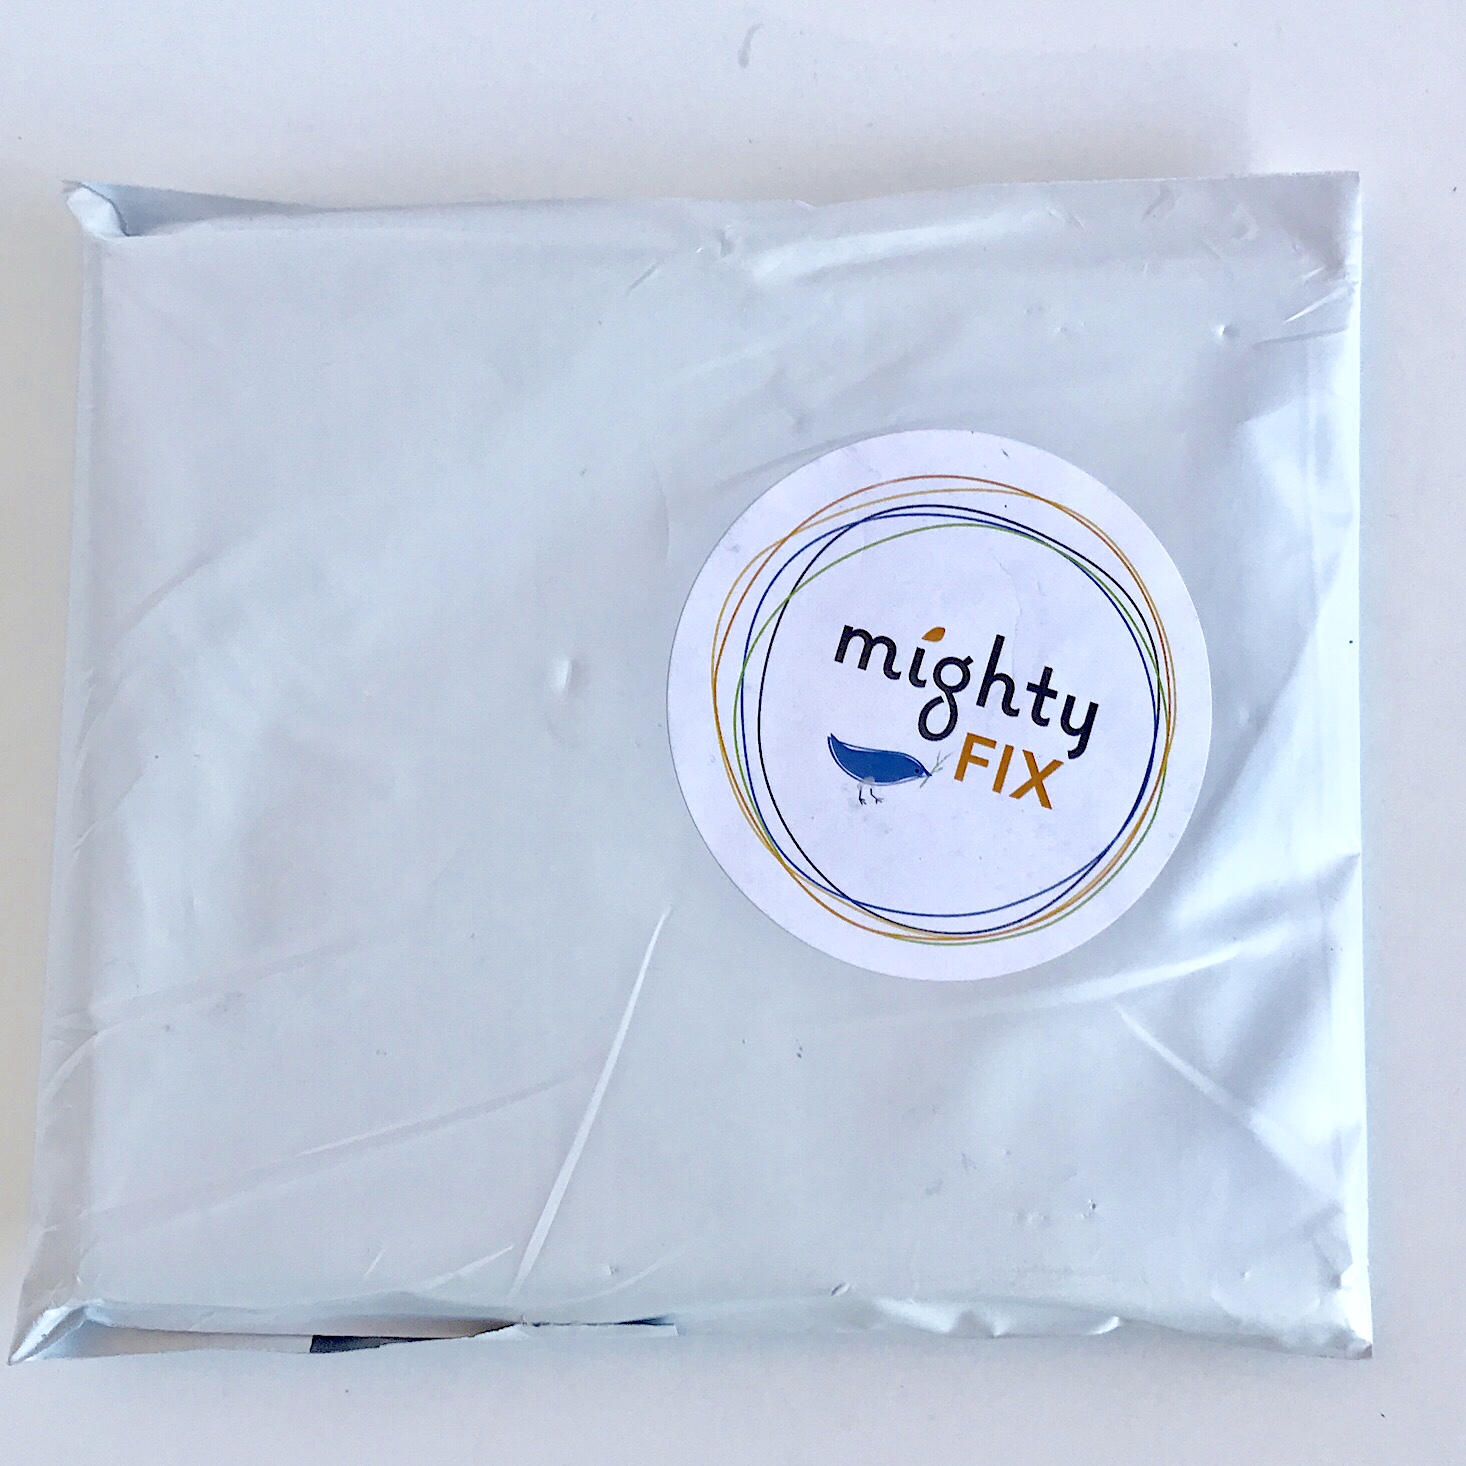 Mighty Fix Subscription Review + 70% off Coupon – February 2019